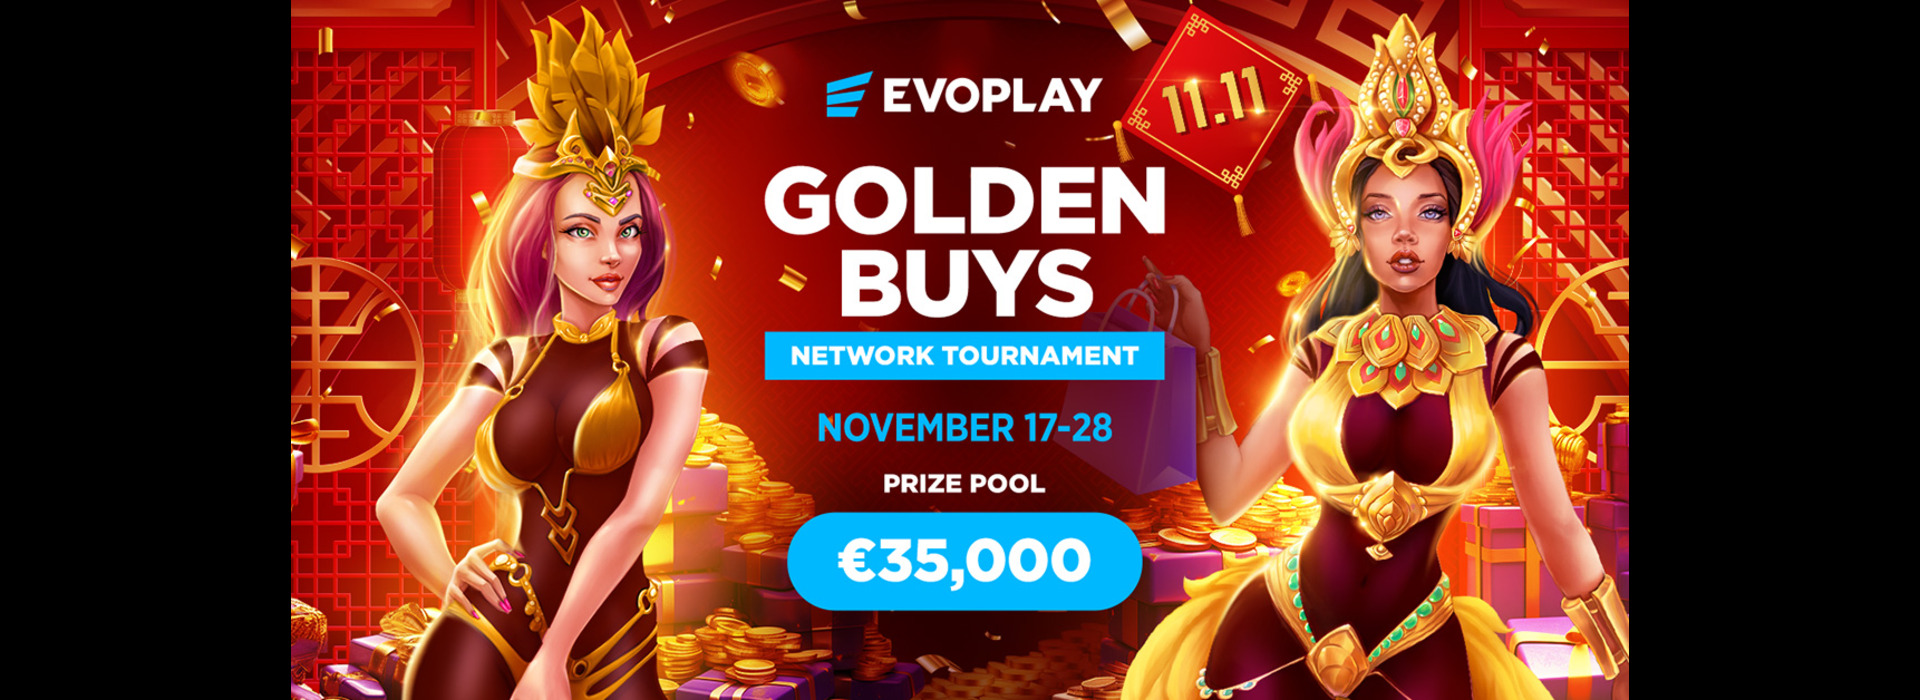 Evoplay Golden Buys Network Tournament